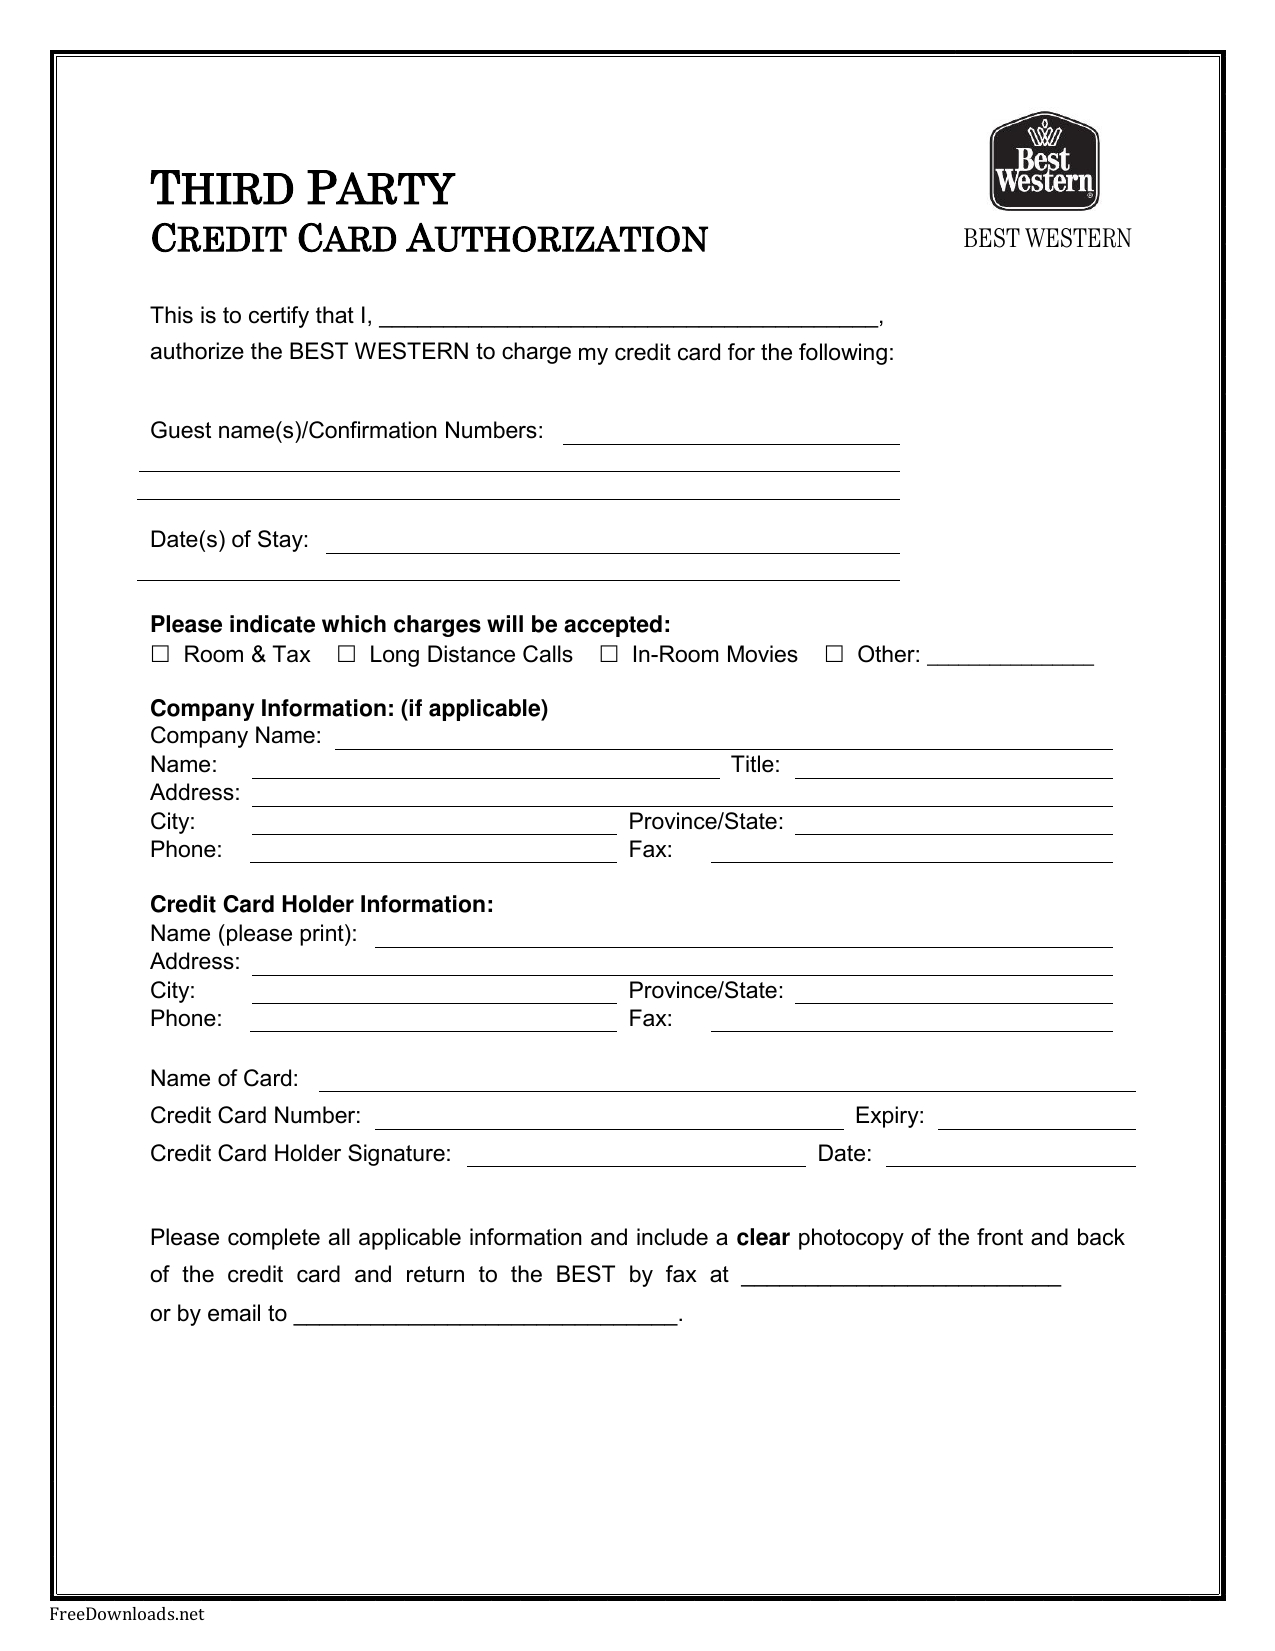 024 Credit Card Authorization Form Template Bbeif1T4 Intended For Credit Card Authorization Form Template Word